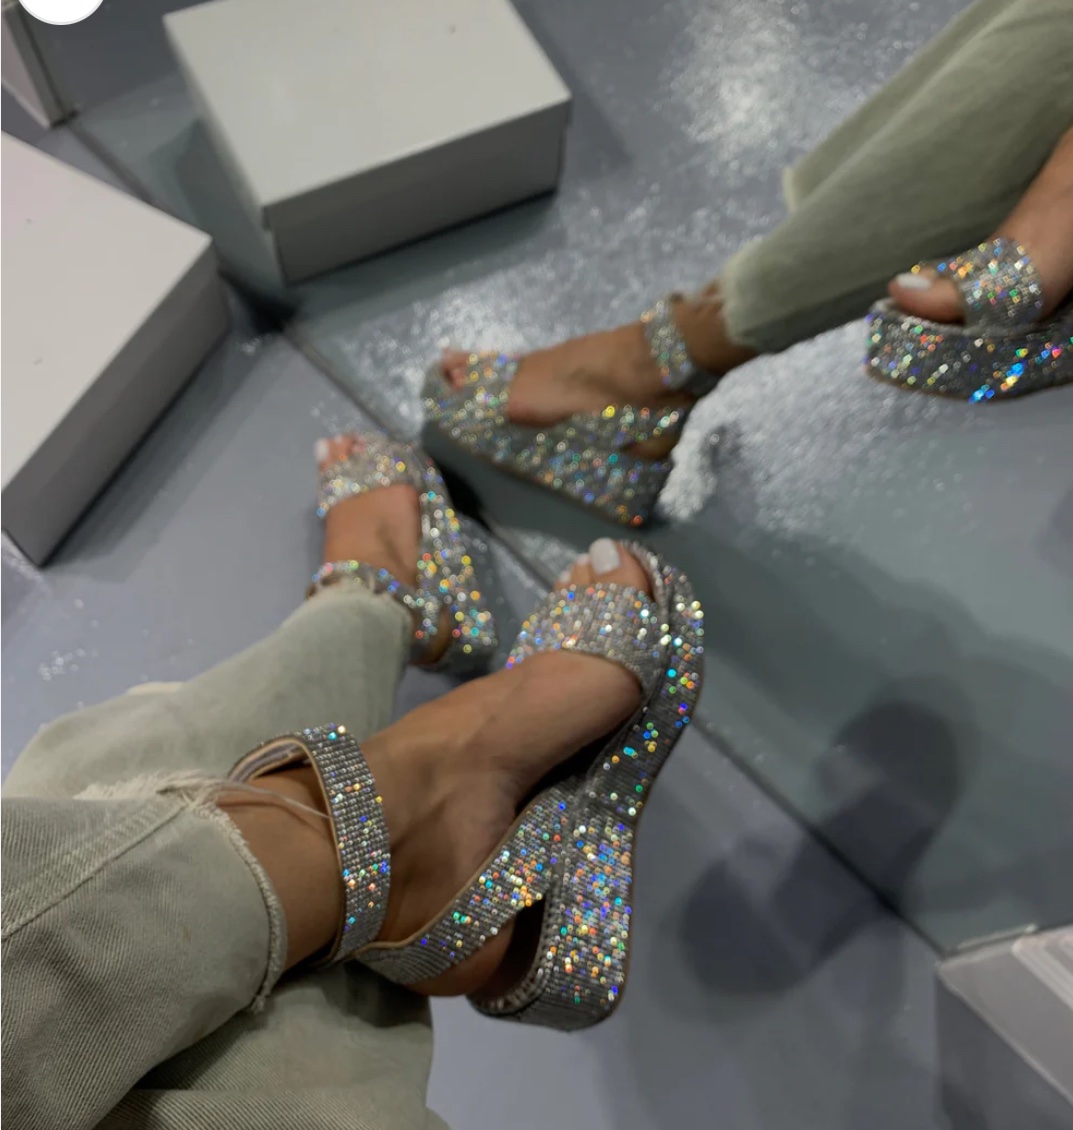 I just received a gift from someone via @official_throne: sparkly sandals | Silver / 9. Thank you! I love being spoilt 🥰 can not wait to have these on my freshly pedicured feet 💋